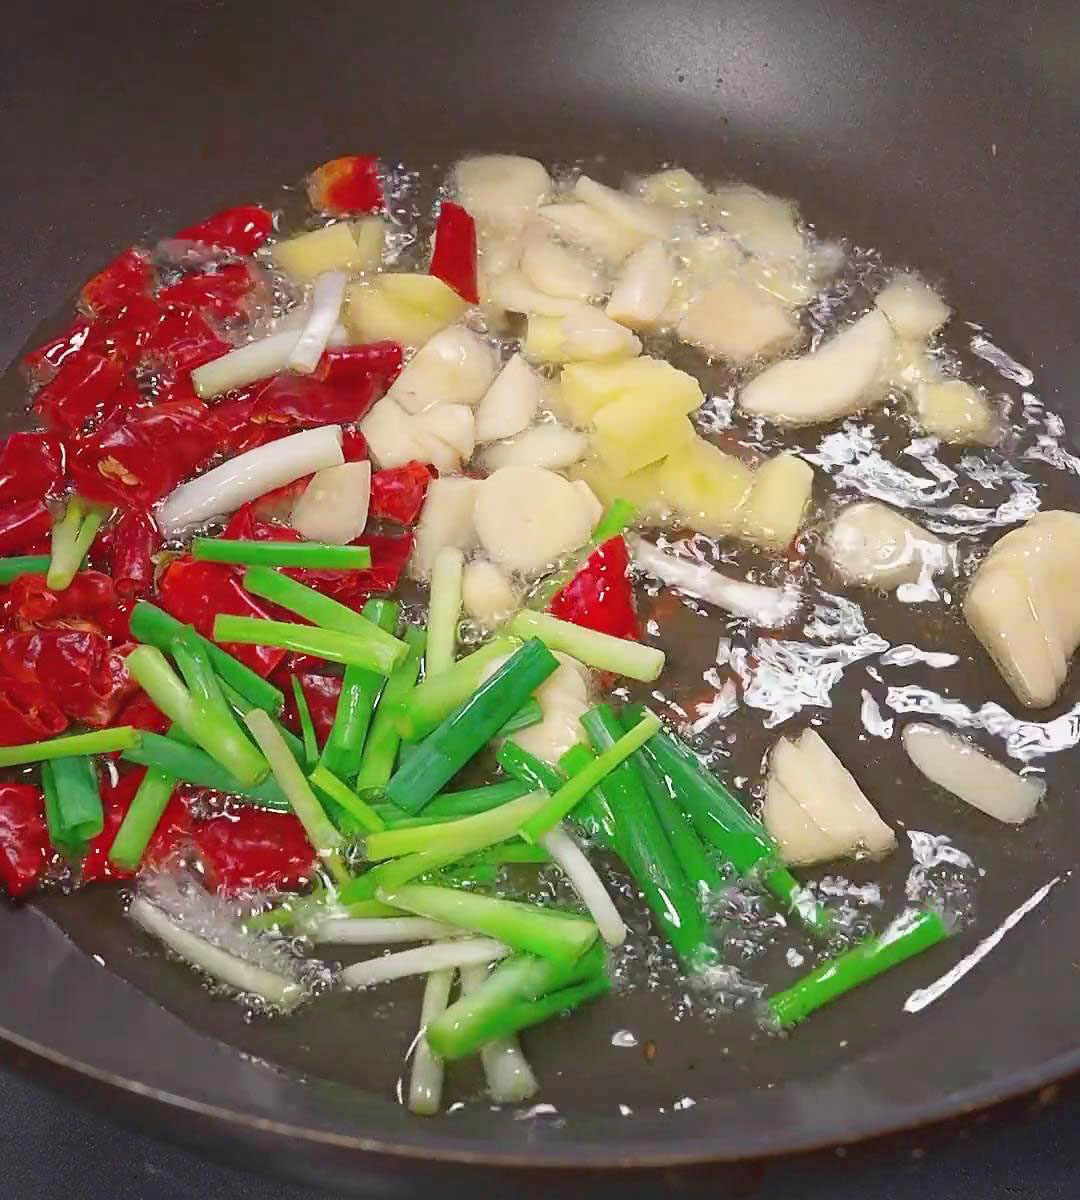 saute the chopped green onions, ginger, and dried peppers